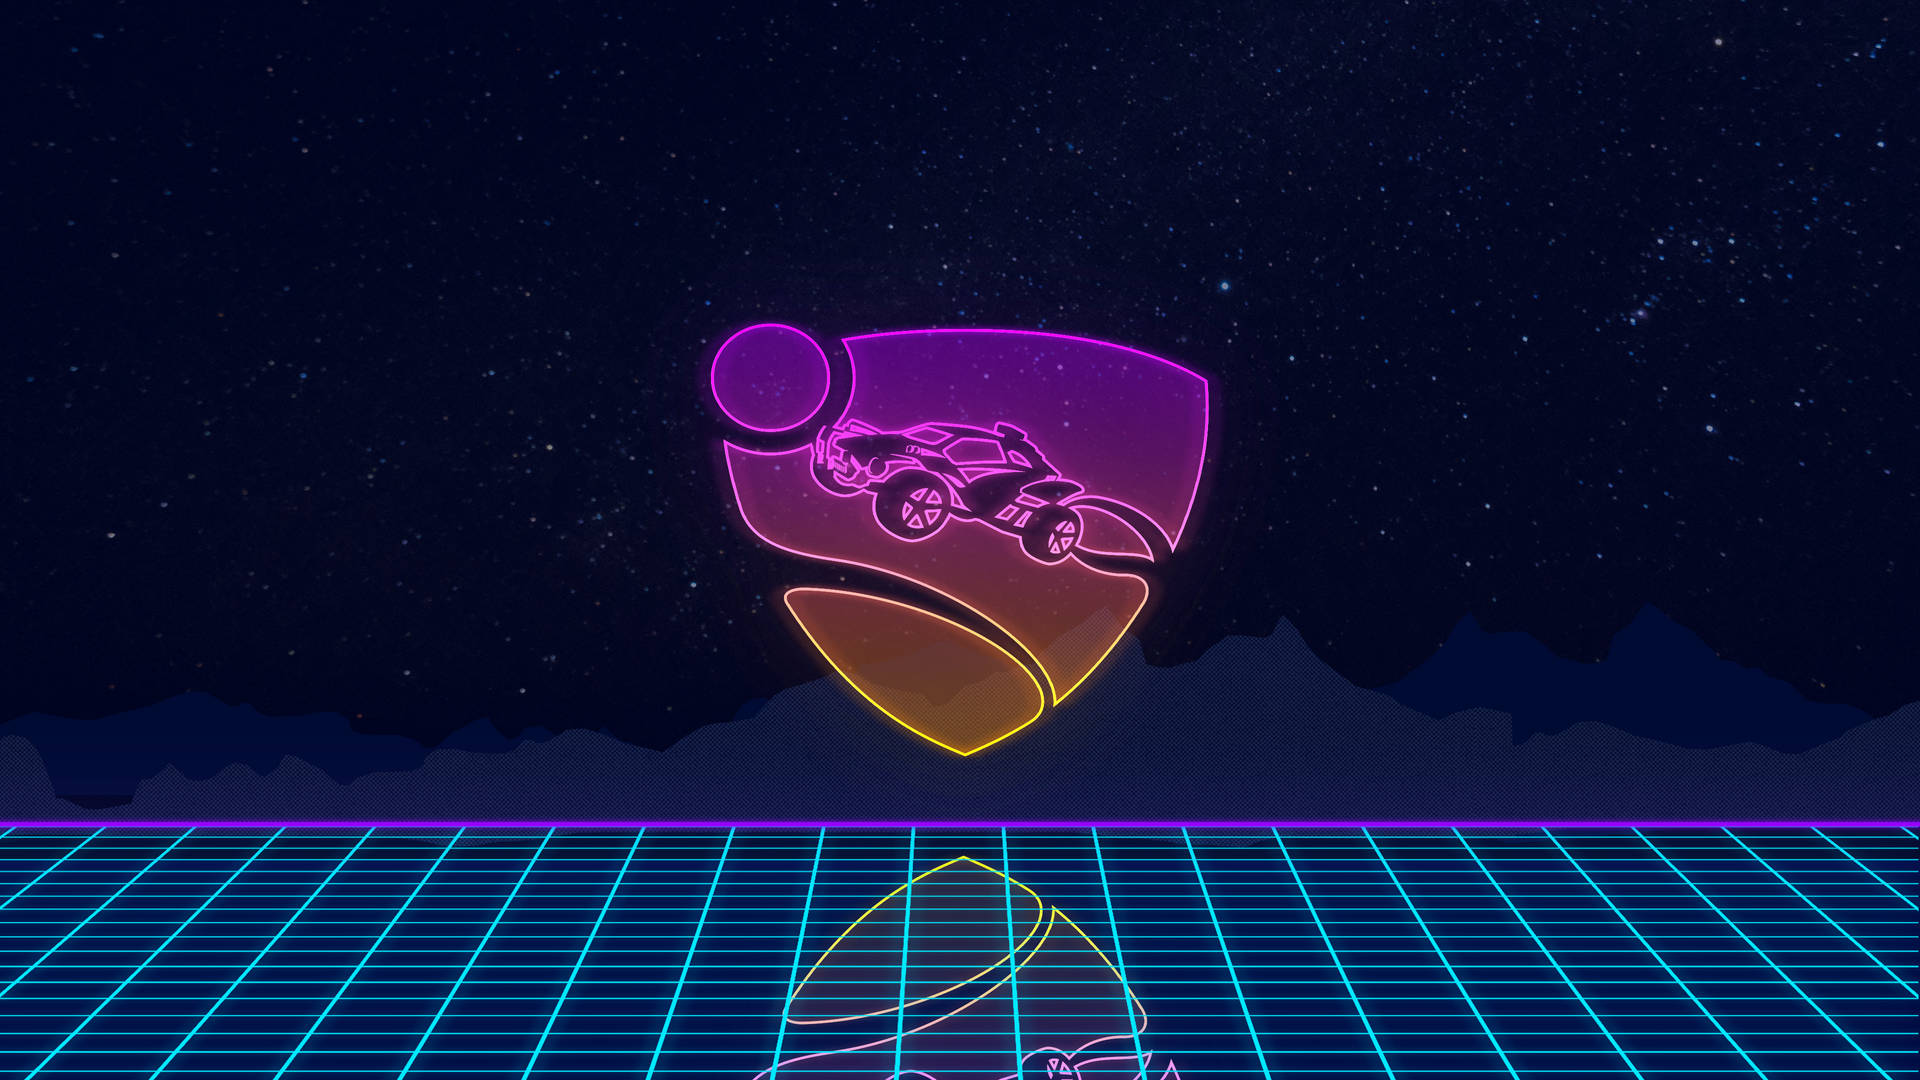 Quench Your Thirst For Ferocious Car Football With Rocket League! Background